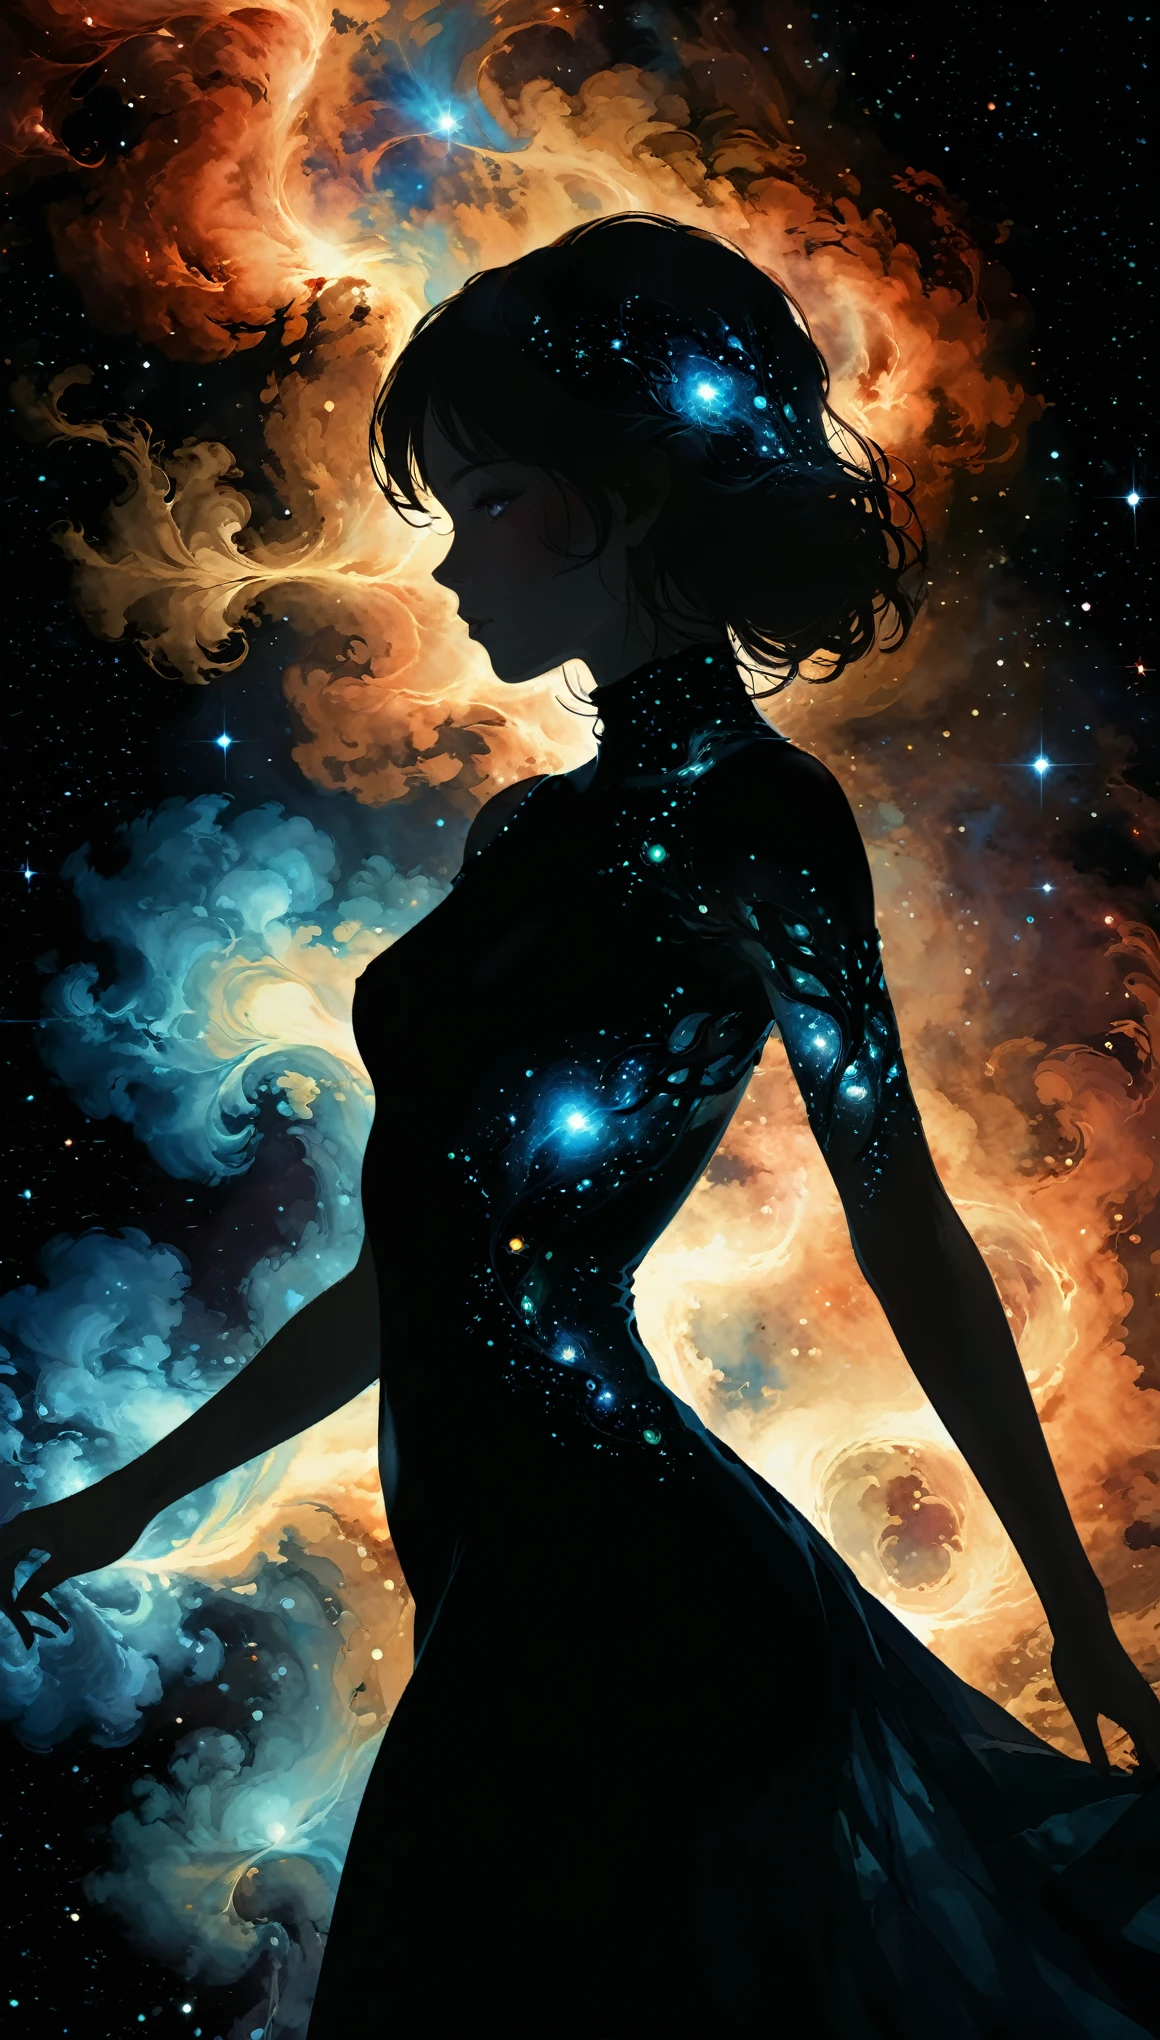 (in style of John Bauer:0.8),(in style of Nick Veasey:1.5),
1girl,(black silhouette body:1.2),dress(translucent arms,it was as if there was a nebula swirling in arms,nebula's glowing arms:1.8),black_background,character cutout,red eyes,
BREAK
Detailed,(darkness:1.1),(very detailed shadows:1.1),absolute shadows,absolute darkness,body silhouette,